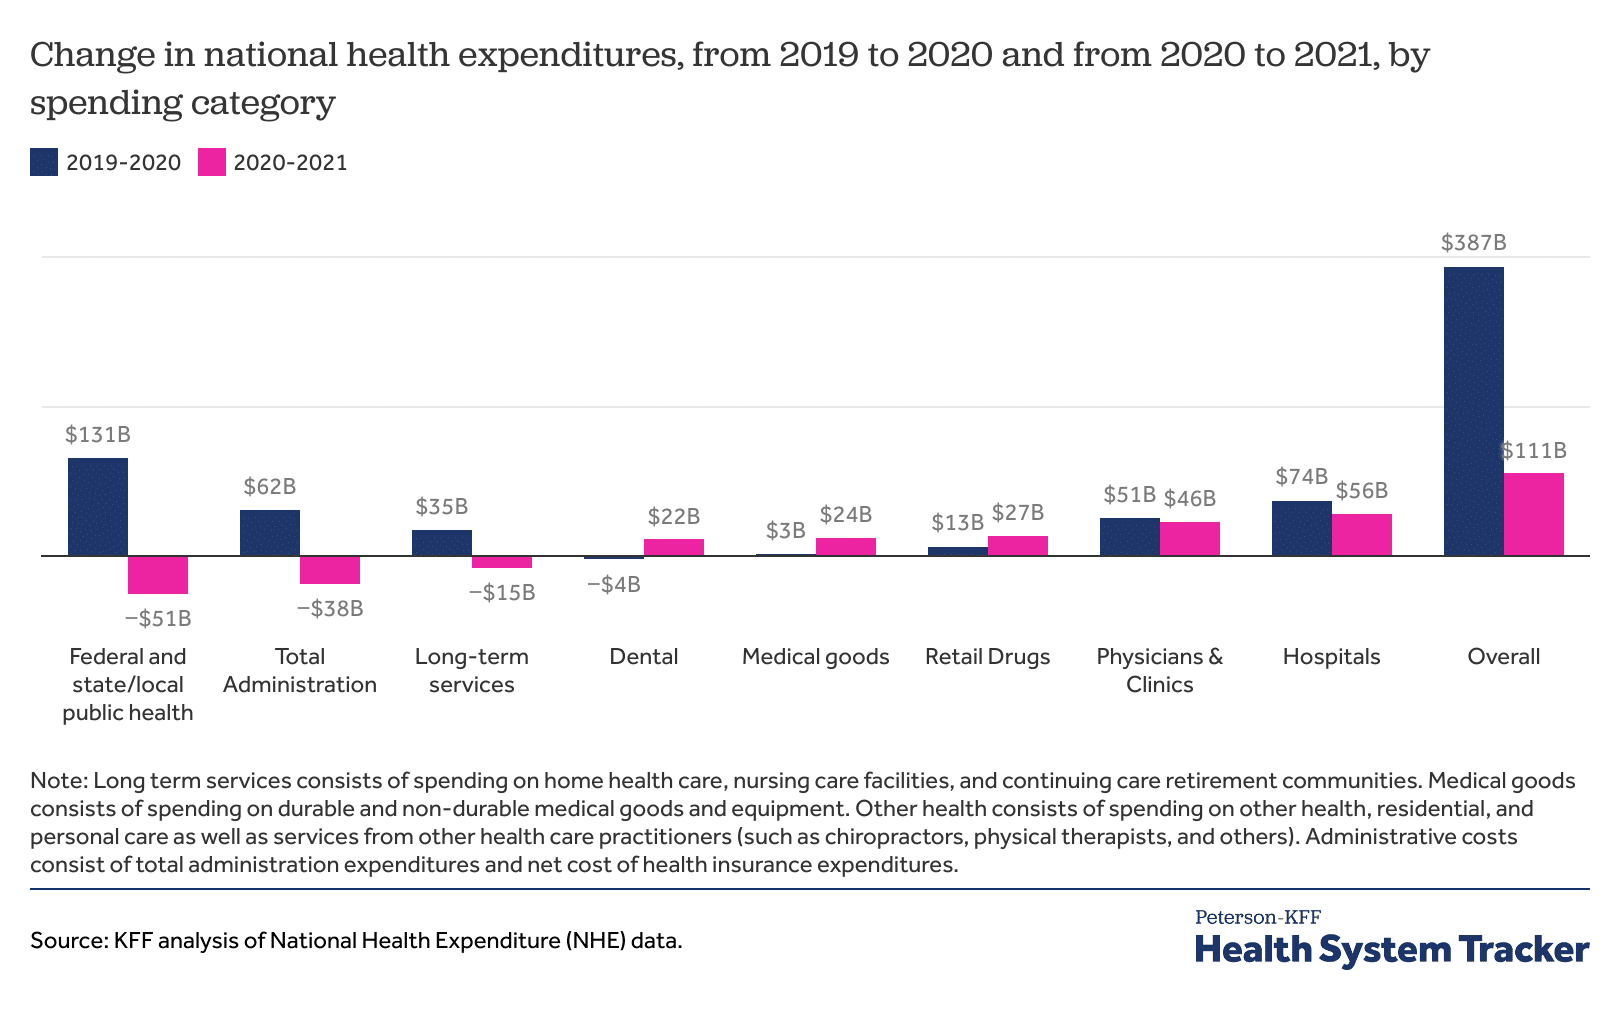 Rising Healthcare Costs